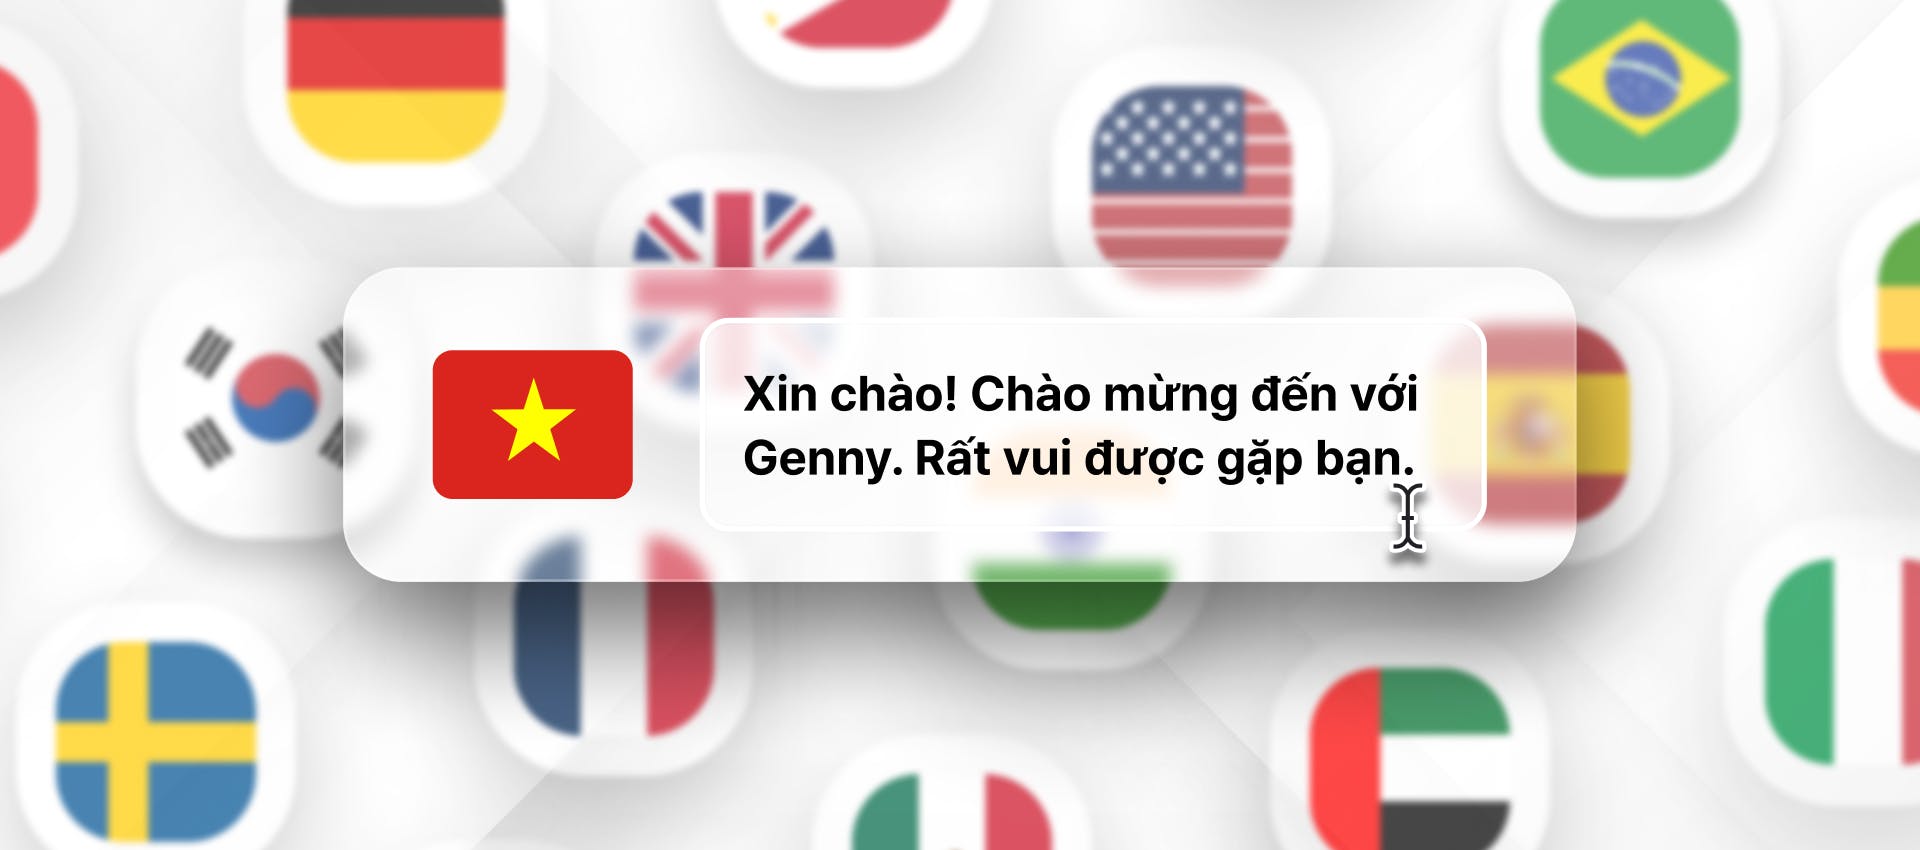 Vietnamese phrase for Vietnamese TTS generation with different flags in the background